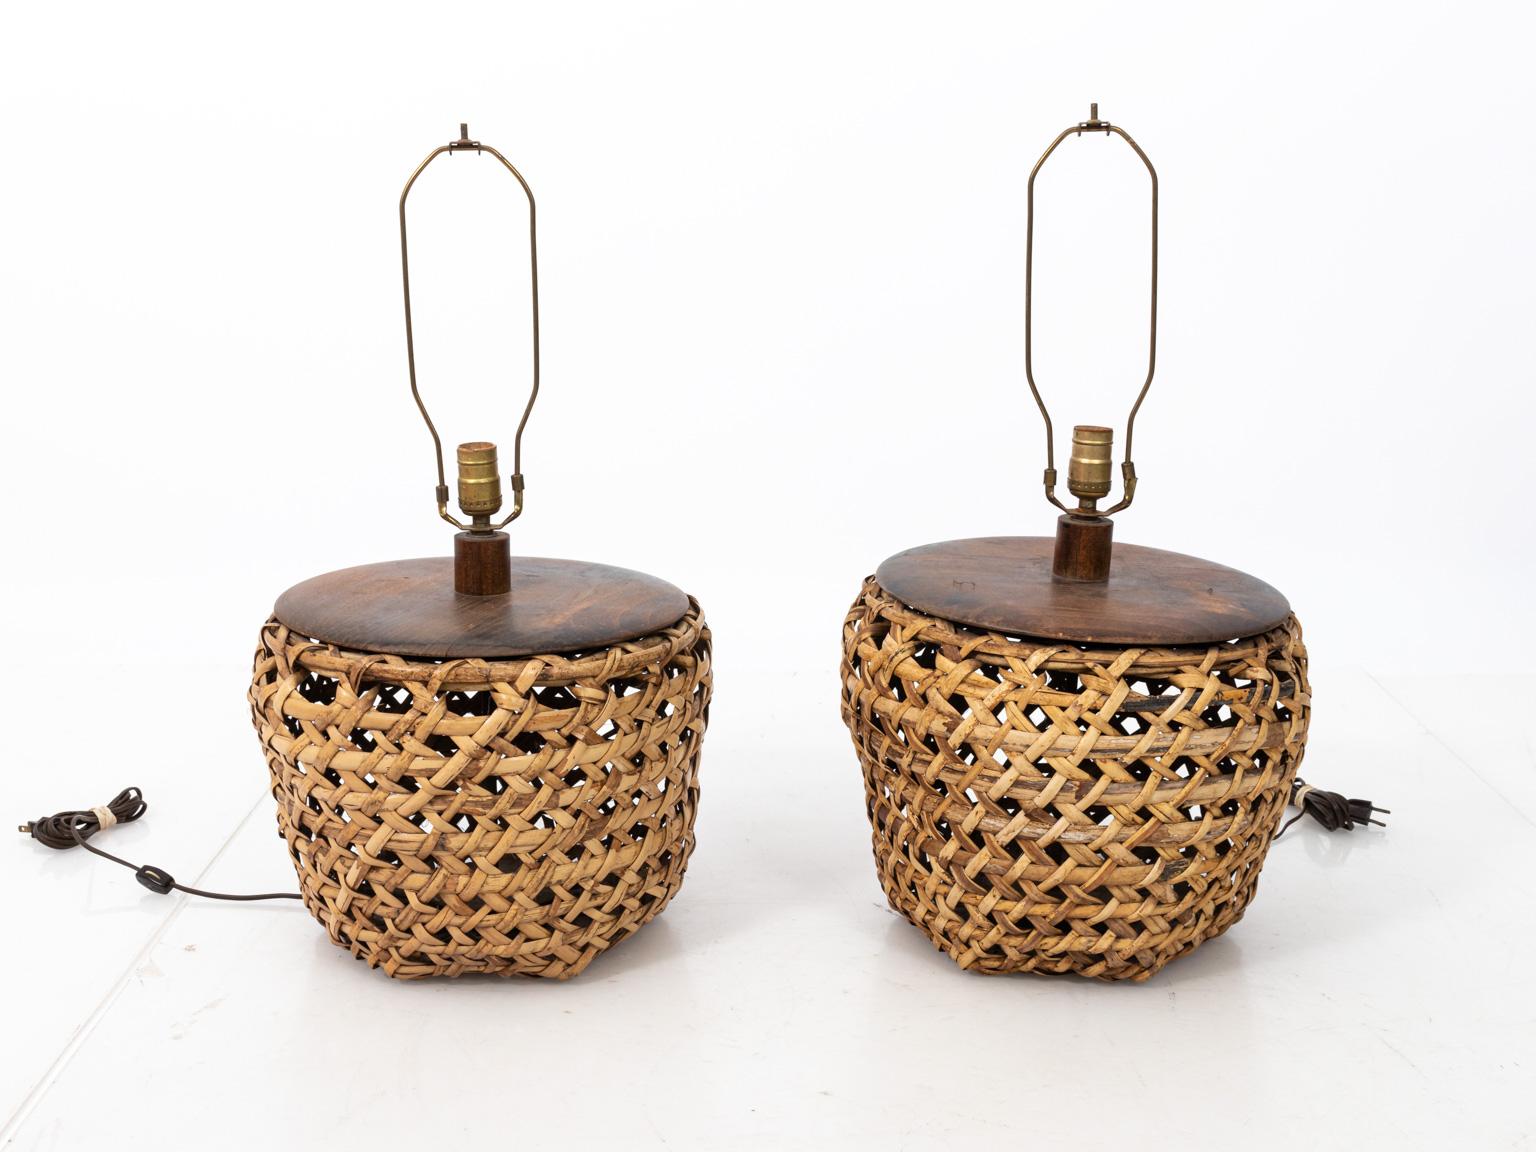 Pair of woven Rattan table lamps with red shades. Please note shades are not included with wear consistent with age including minor loss to the Rattan.